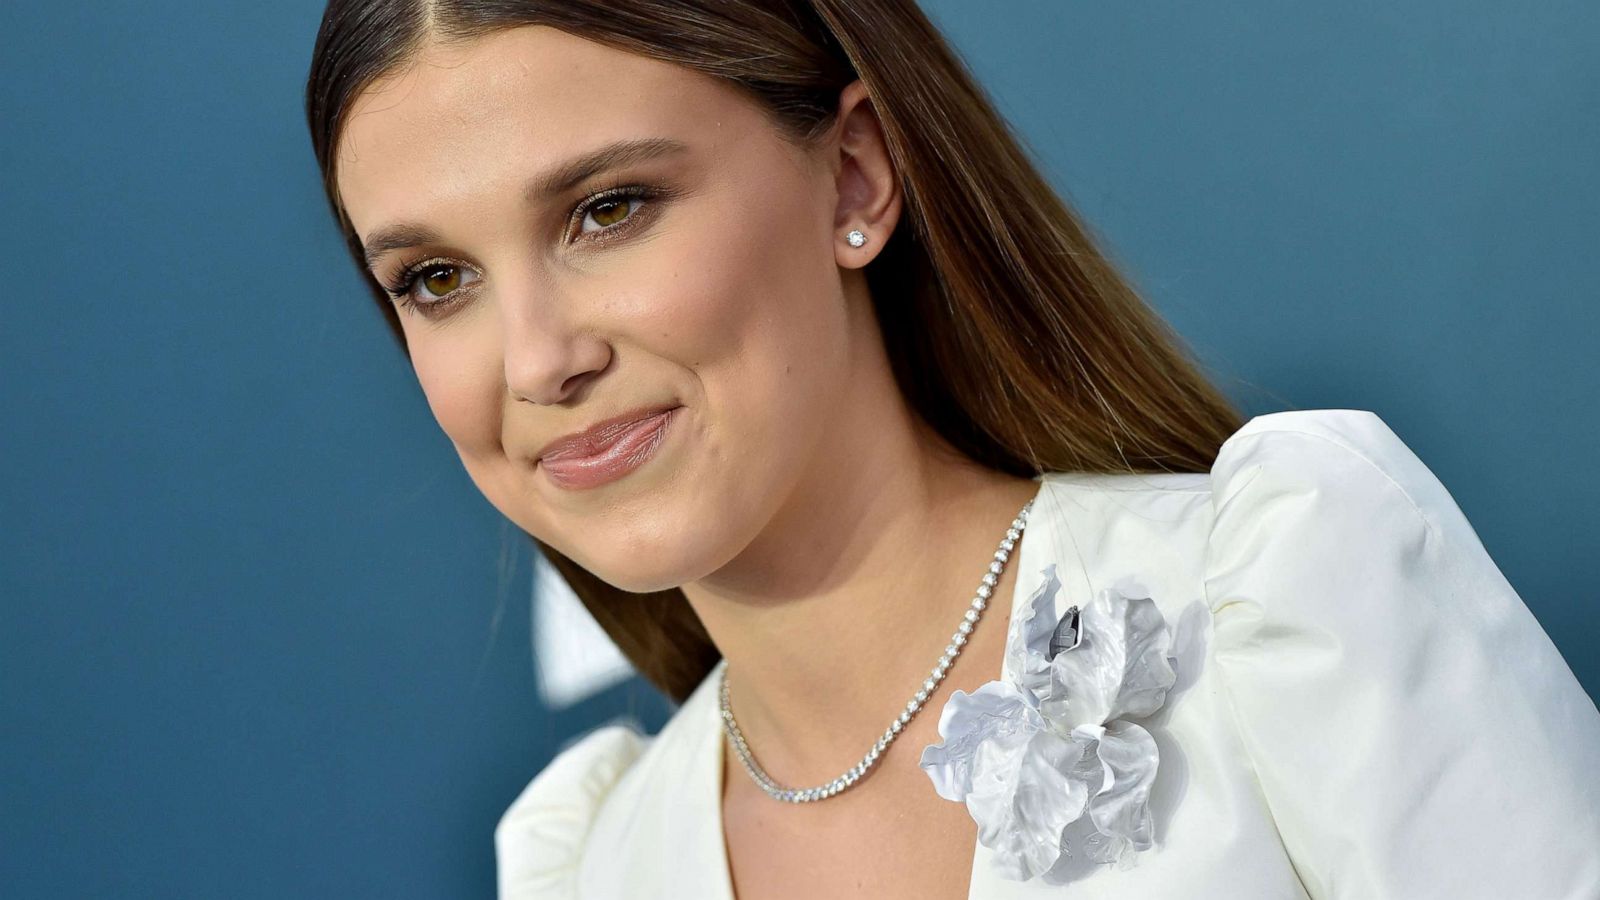 Millie Bobby Brown opens up about halting social media, healing and more -  ABC News